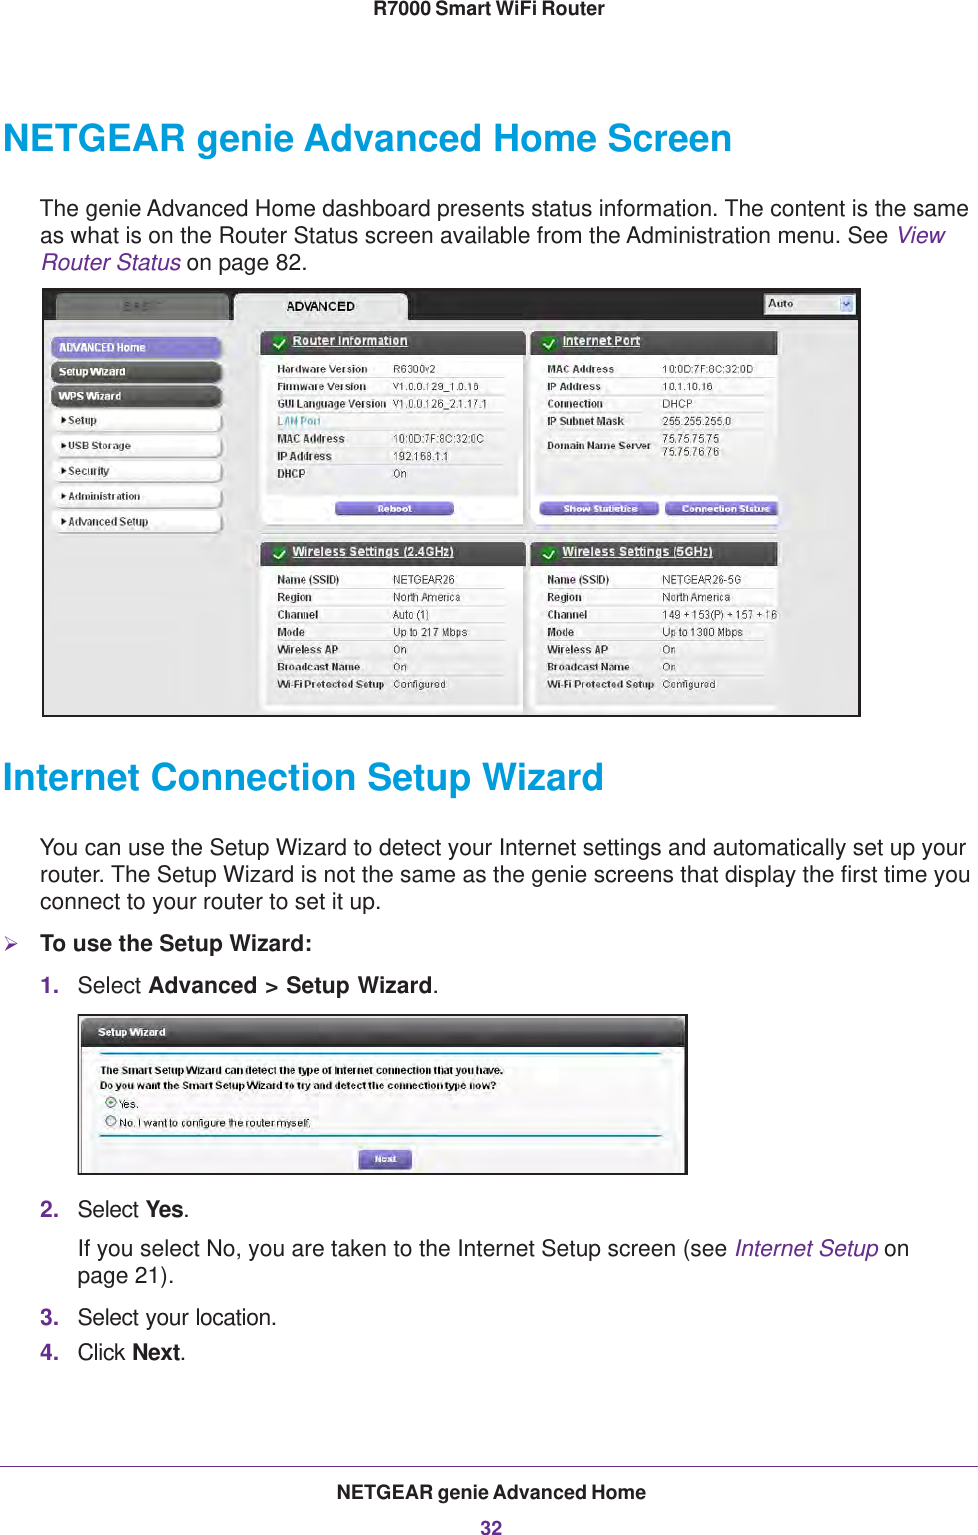 NETGEAR genie Advanced Home32R7000 Smart WiFi Router NETGEAR genie Advanced Home ScreenThe genie Advanced Home dashboard presents status information. The content is the same as what is on the Router Status screen available from the Administration menu. See View Router Status on page  82.Internet Connection Setup WizardYou can use the Setup Wizard to detect your Internet settings and automatically set up your router. The Setup Wizard is not the same as the genie screens that display the first time you connect to your router to set it up.To use the Setup Wizard:1. Select Advanced &gt; Setup Wizard. 2. Select Yes. If you select No, you are taken to the Internet Setup screen (see Internet Setup on page  21). 3. Select your location.4. Click Next.